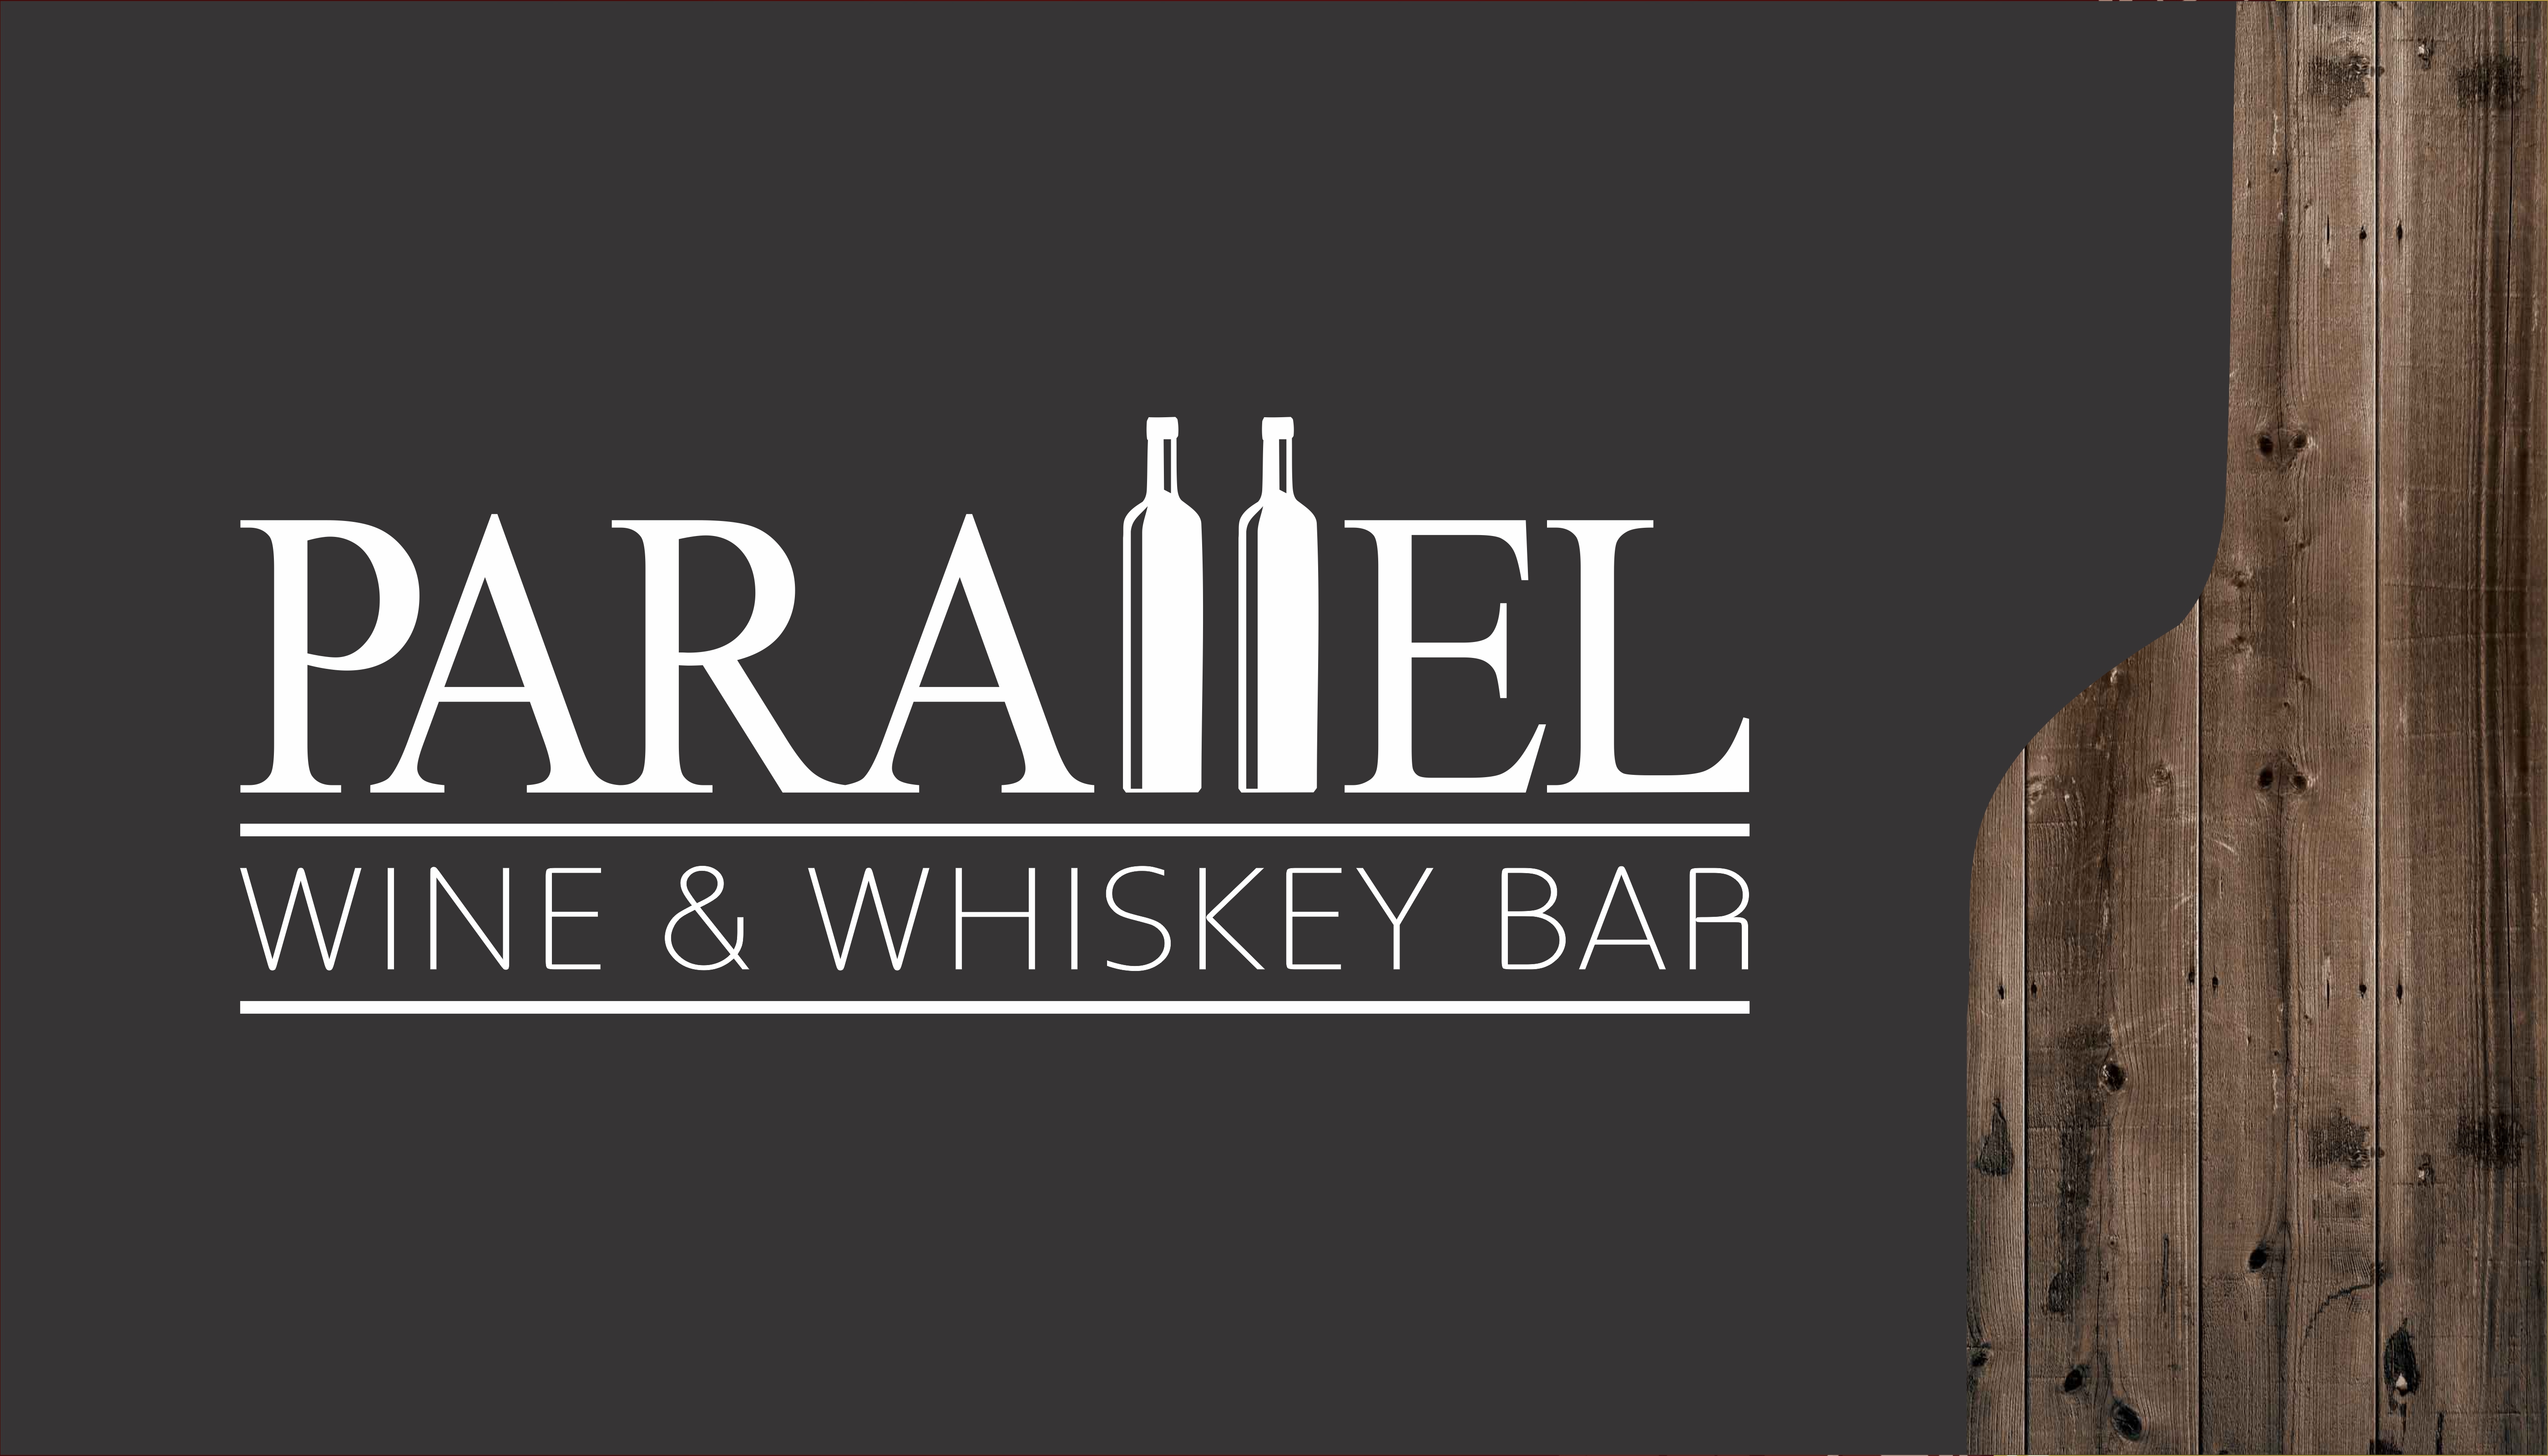 Parallel Wine & Whiskey Bar